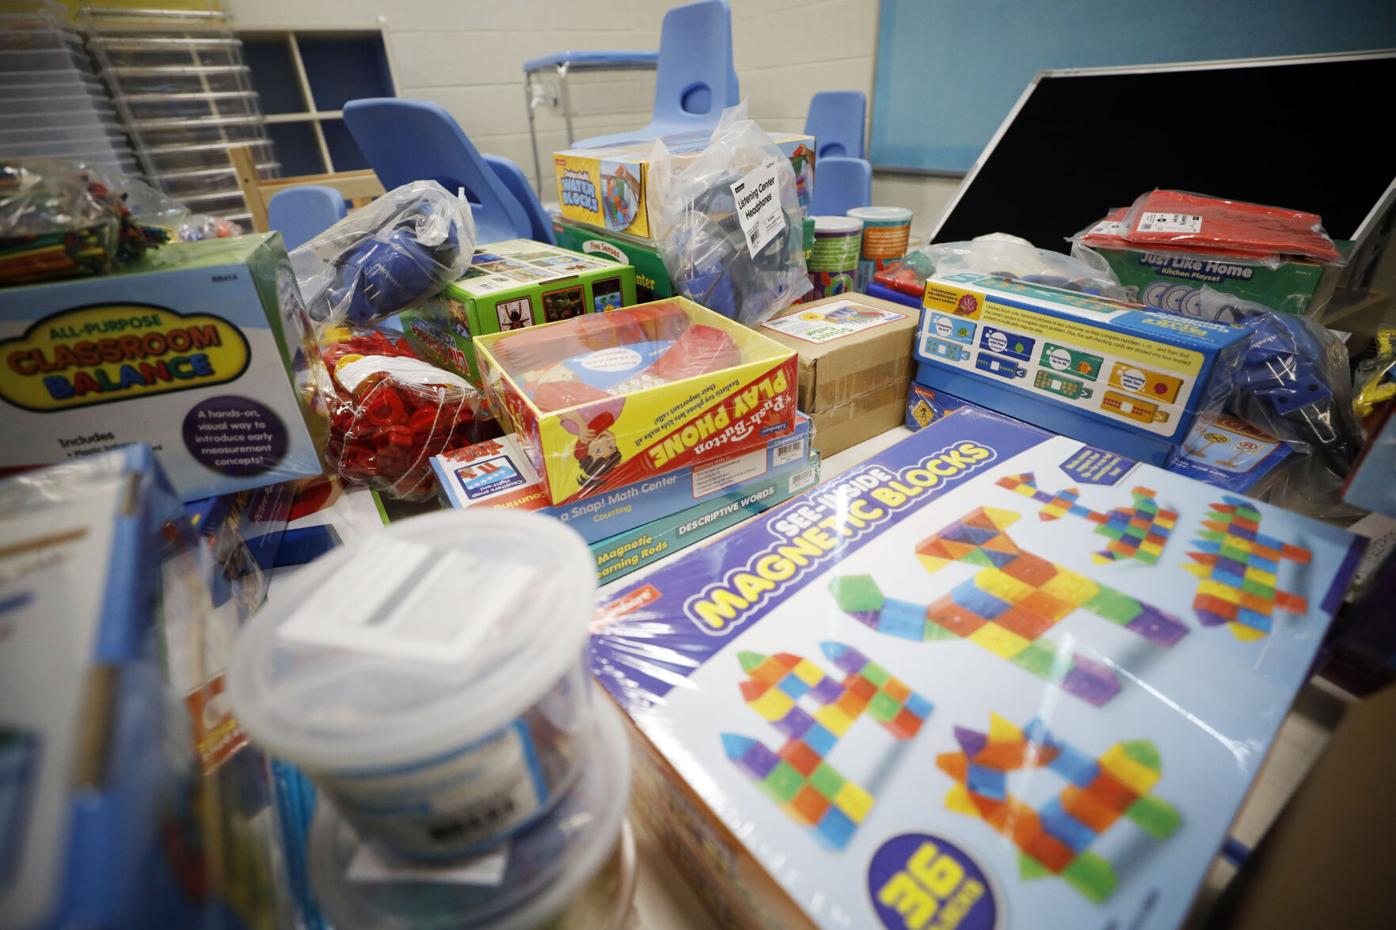 new classroom learning supplies and furniture for young children